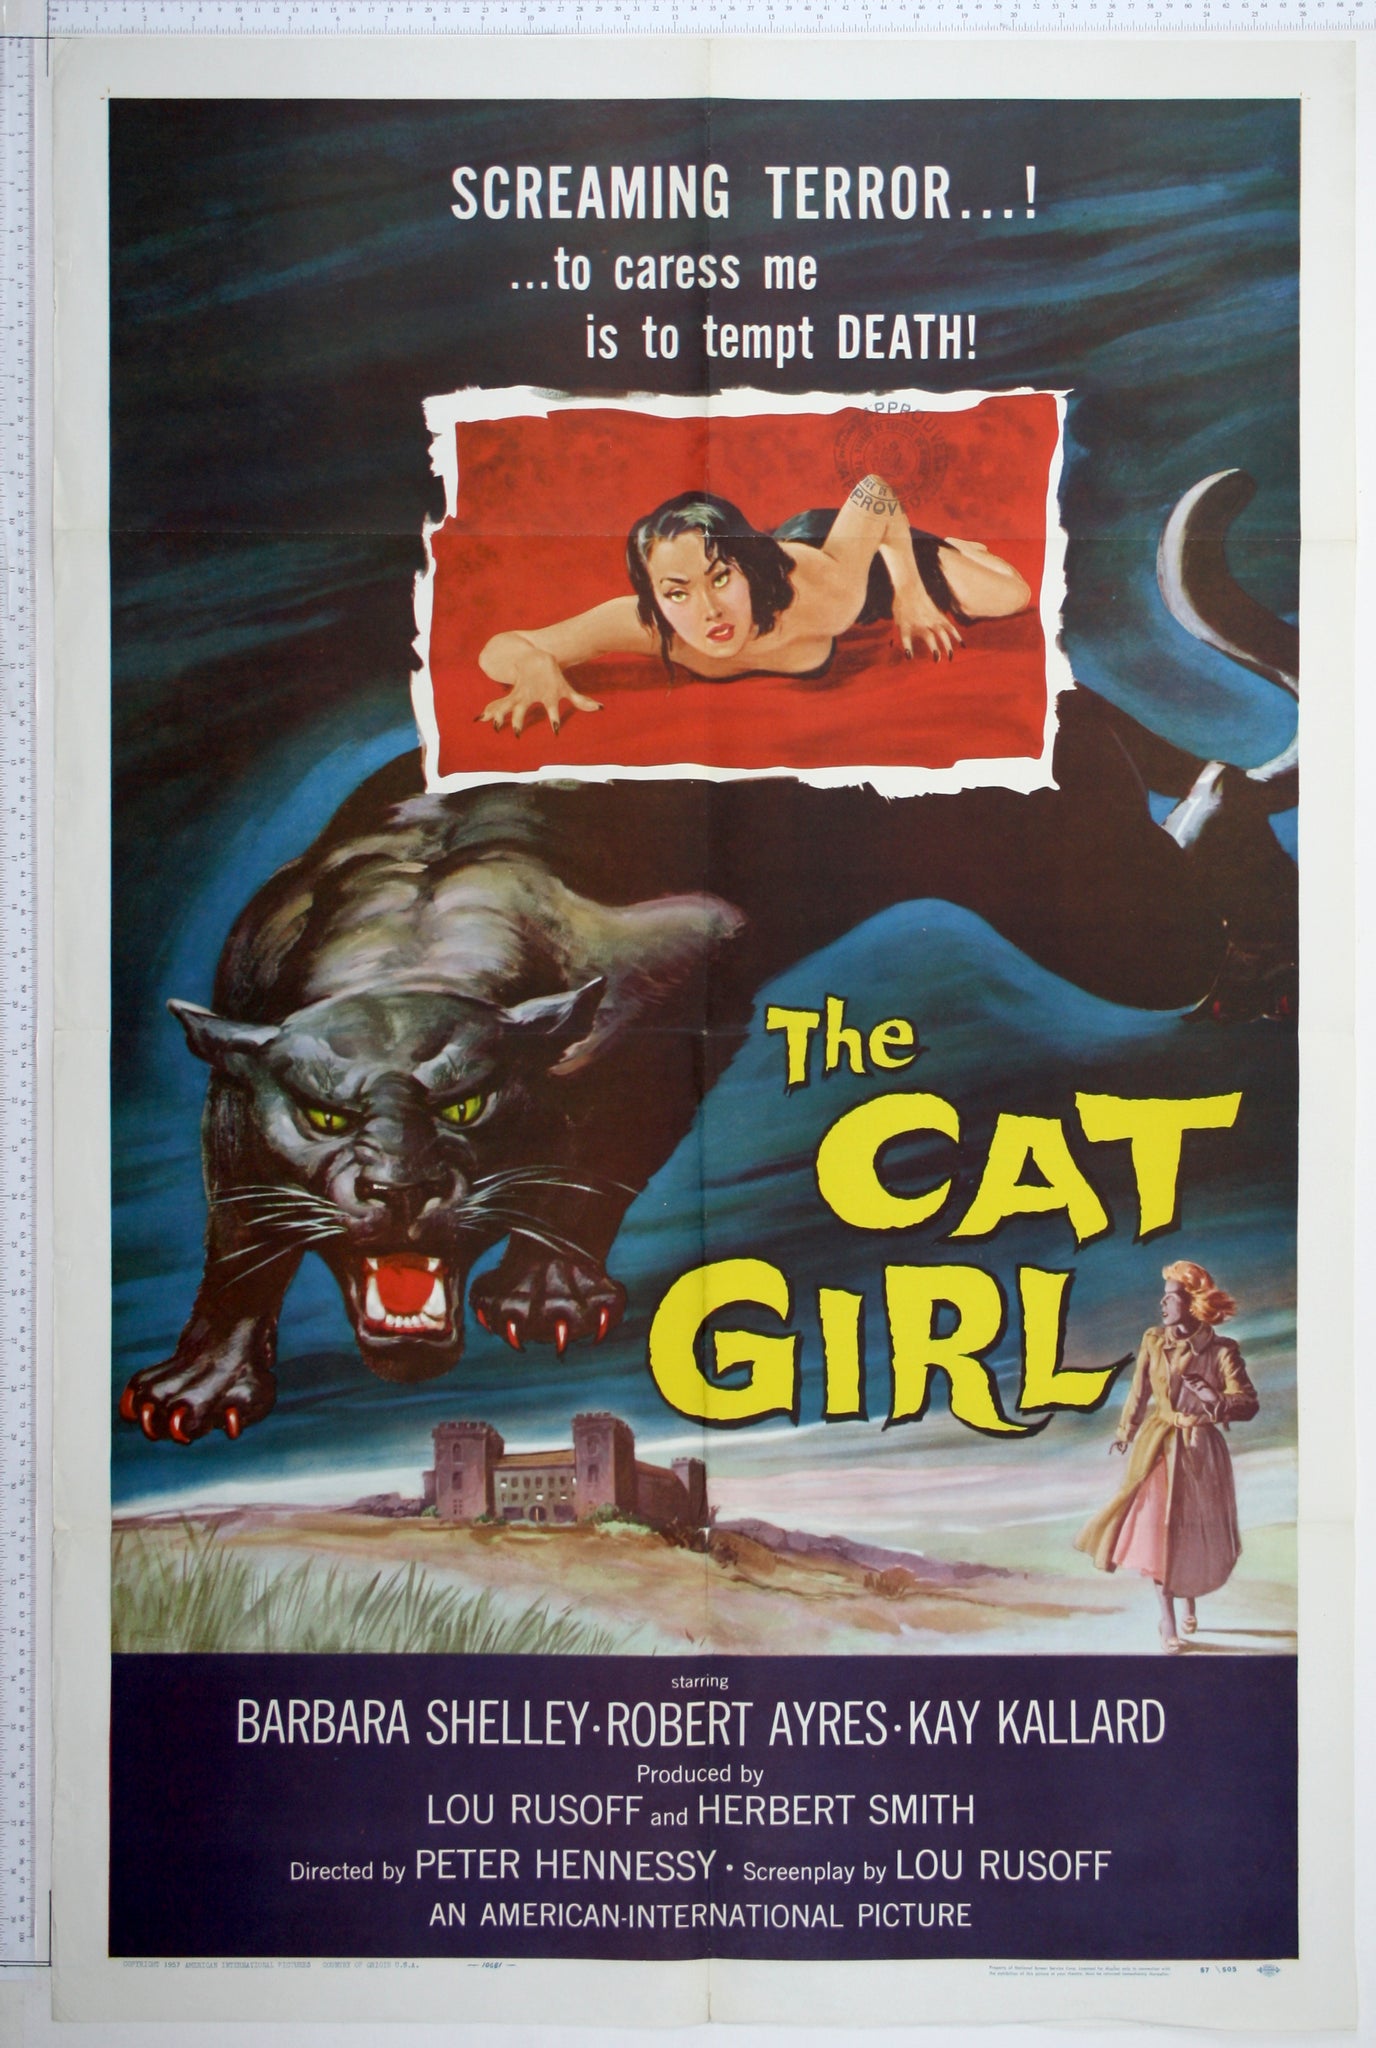 A huge snarling black panther writhes over distant, house. In inset box a near-naked woman mirrors the panther's pose.